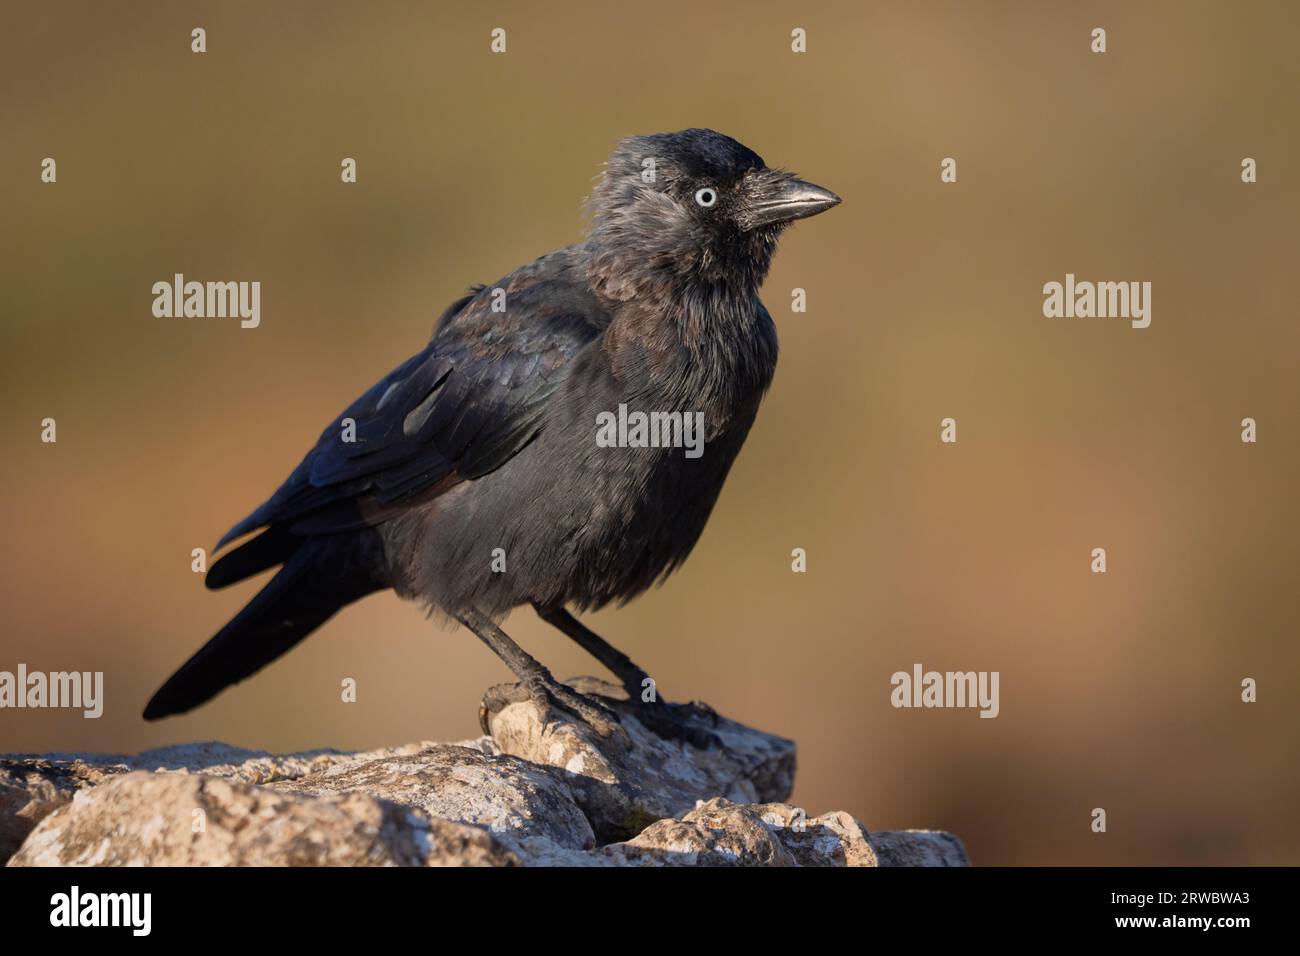 Side view of wild black jackdaw bird with blue eye on stone against blurred background Stock Photo